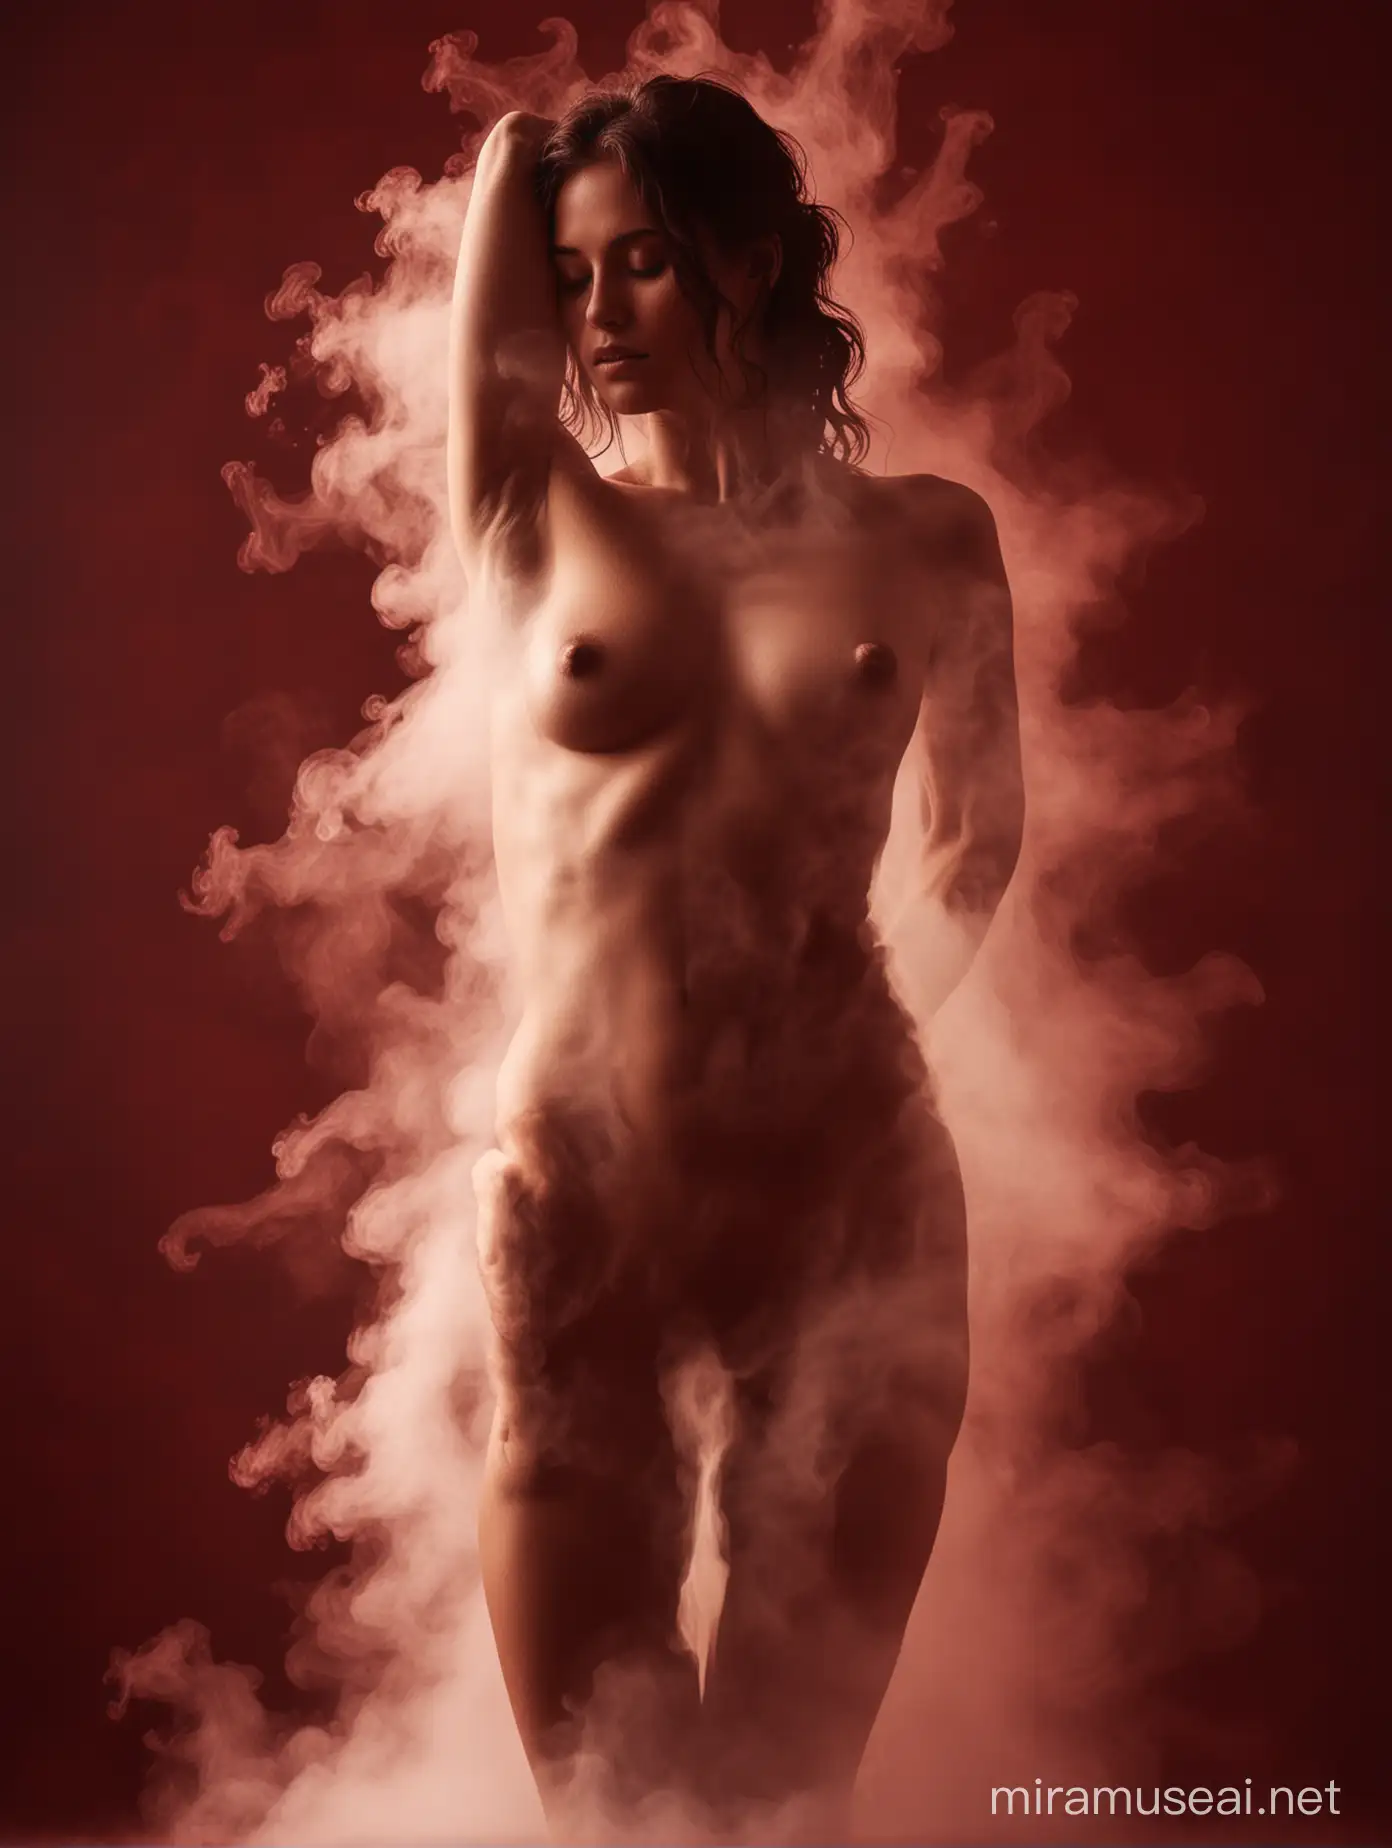 silhouette of nude woman's body made from steam on dark red backround.